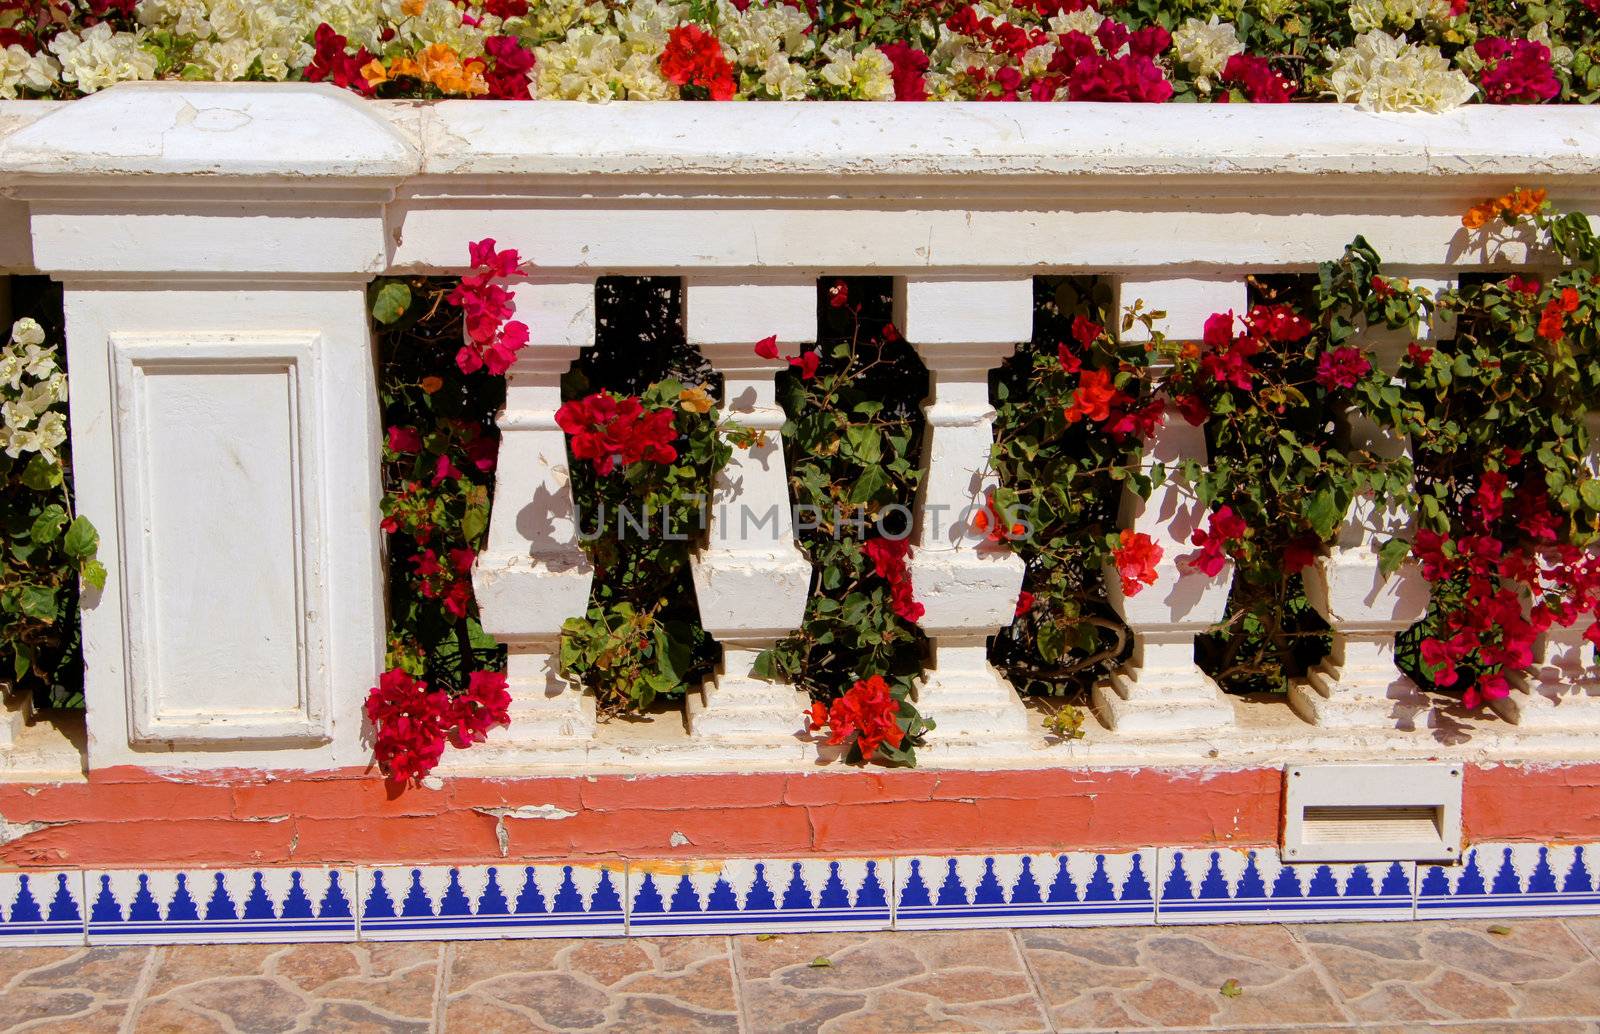 Arabic architecture: walkway with blooming bougainvillea plant              